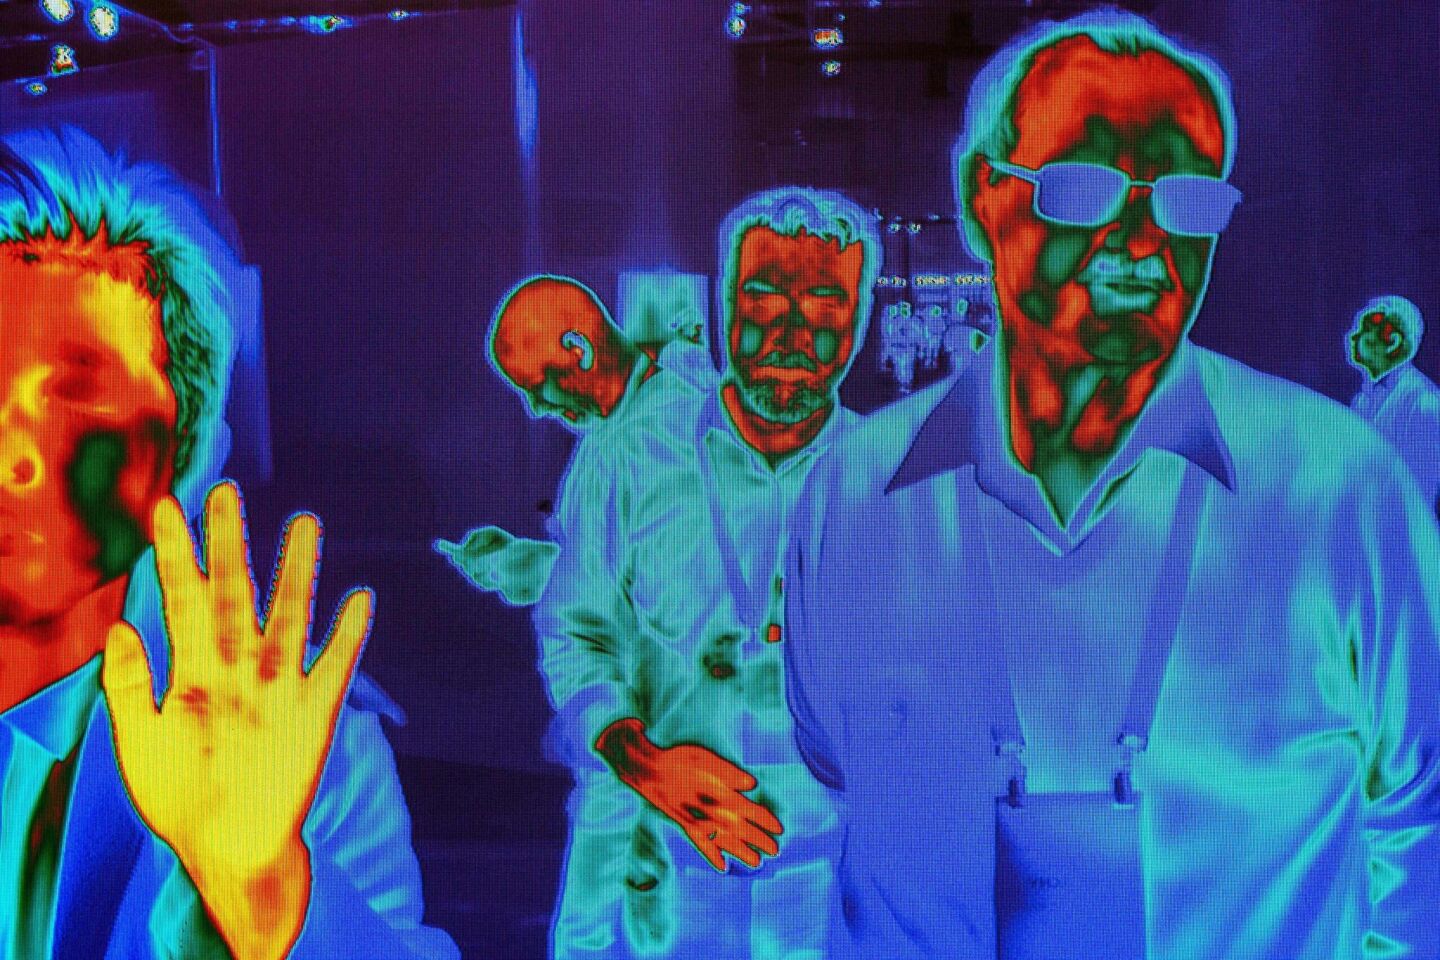 People are captured by FLIR (Forward-Looking Infrared) HD Thermal Imaging Cameras as they walk near the FLIR exhibit at the Las Vegas Convention Center during CES 2019 in Las Vegas.